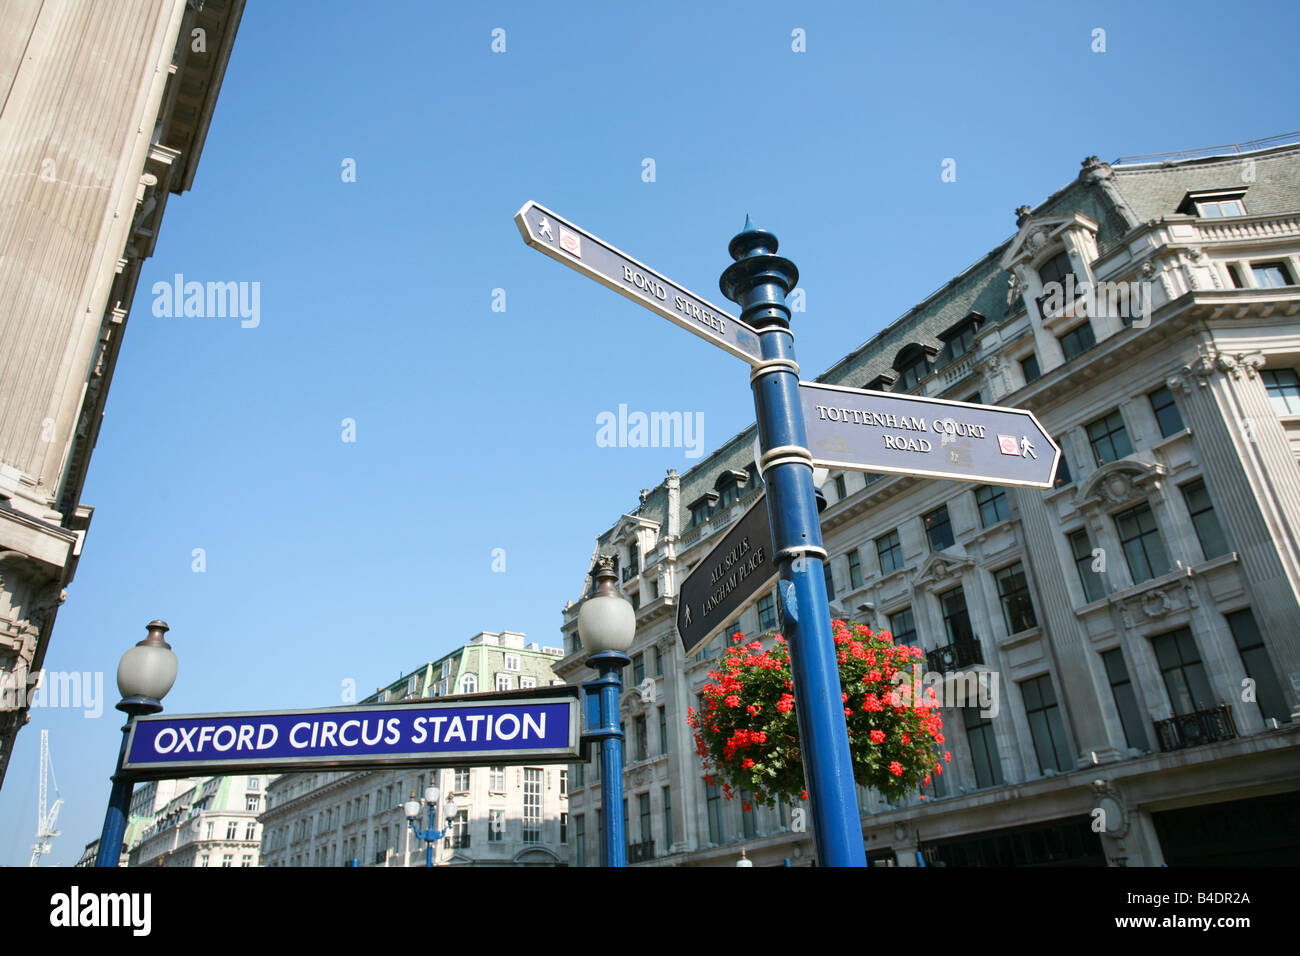 Tourist street signs in Oxford Circus area of London show major landmarks Tottenham Court Road and Bond Street UK Stock Photo